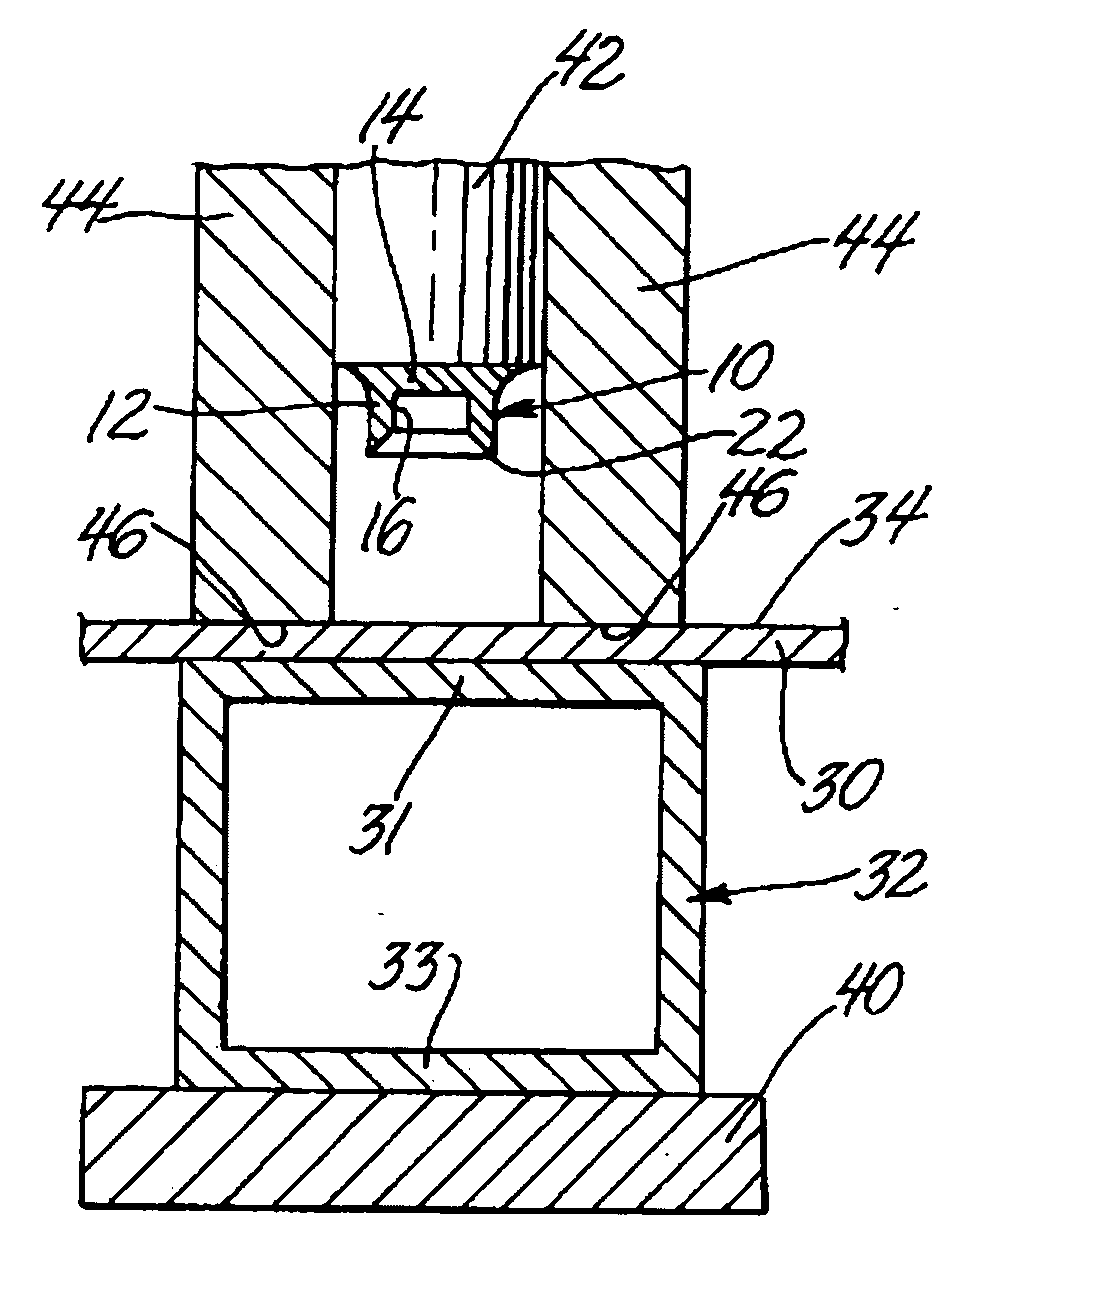 Method of joining dissimilar materials